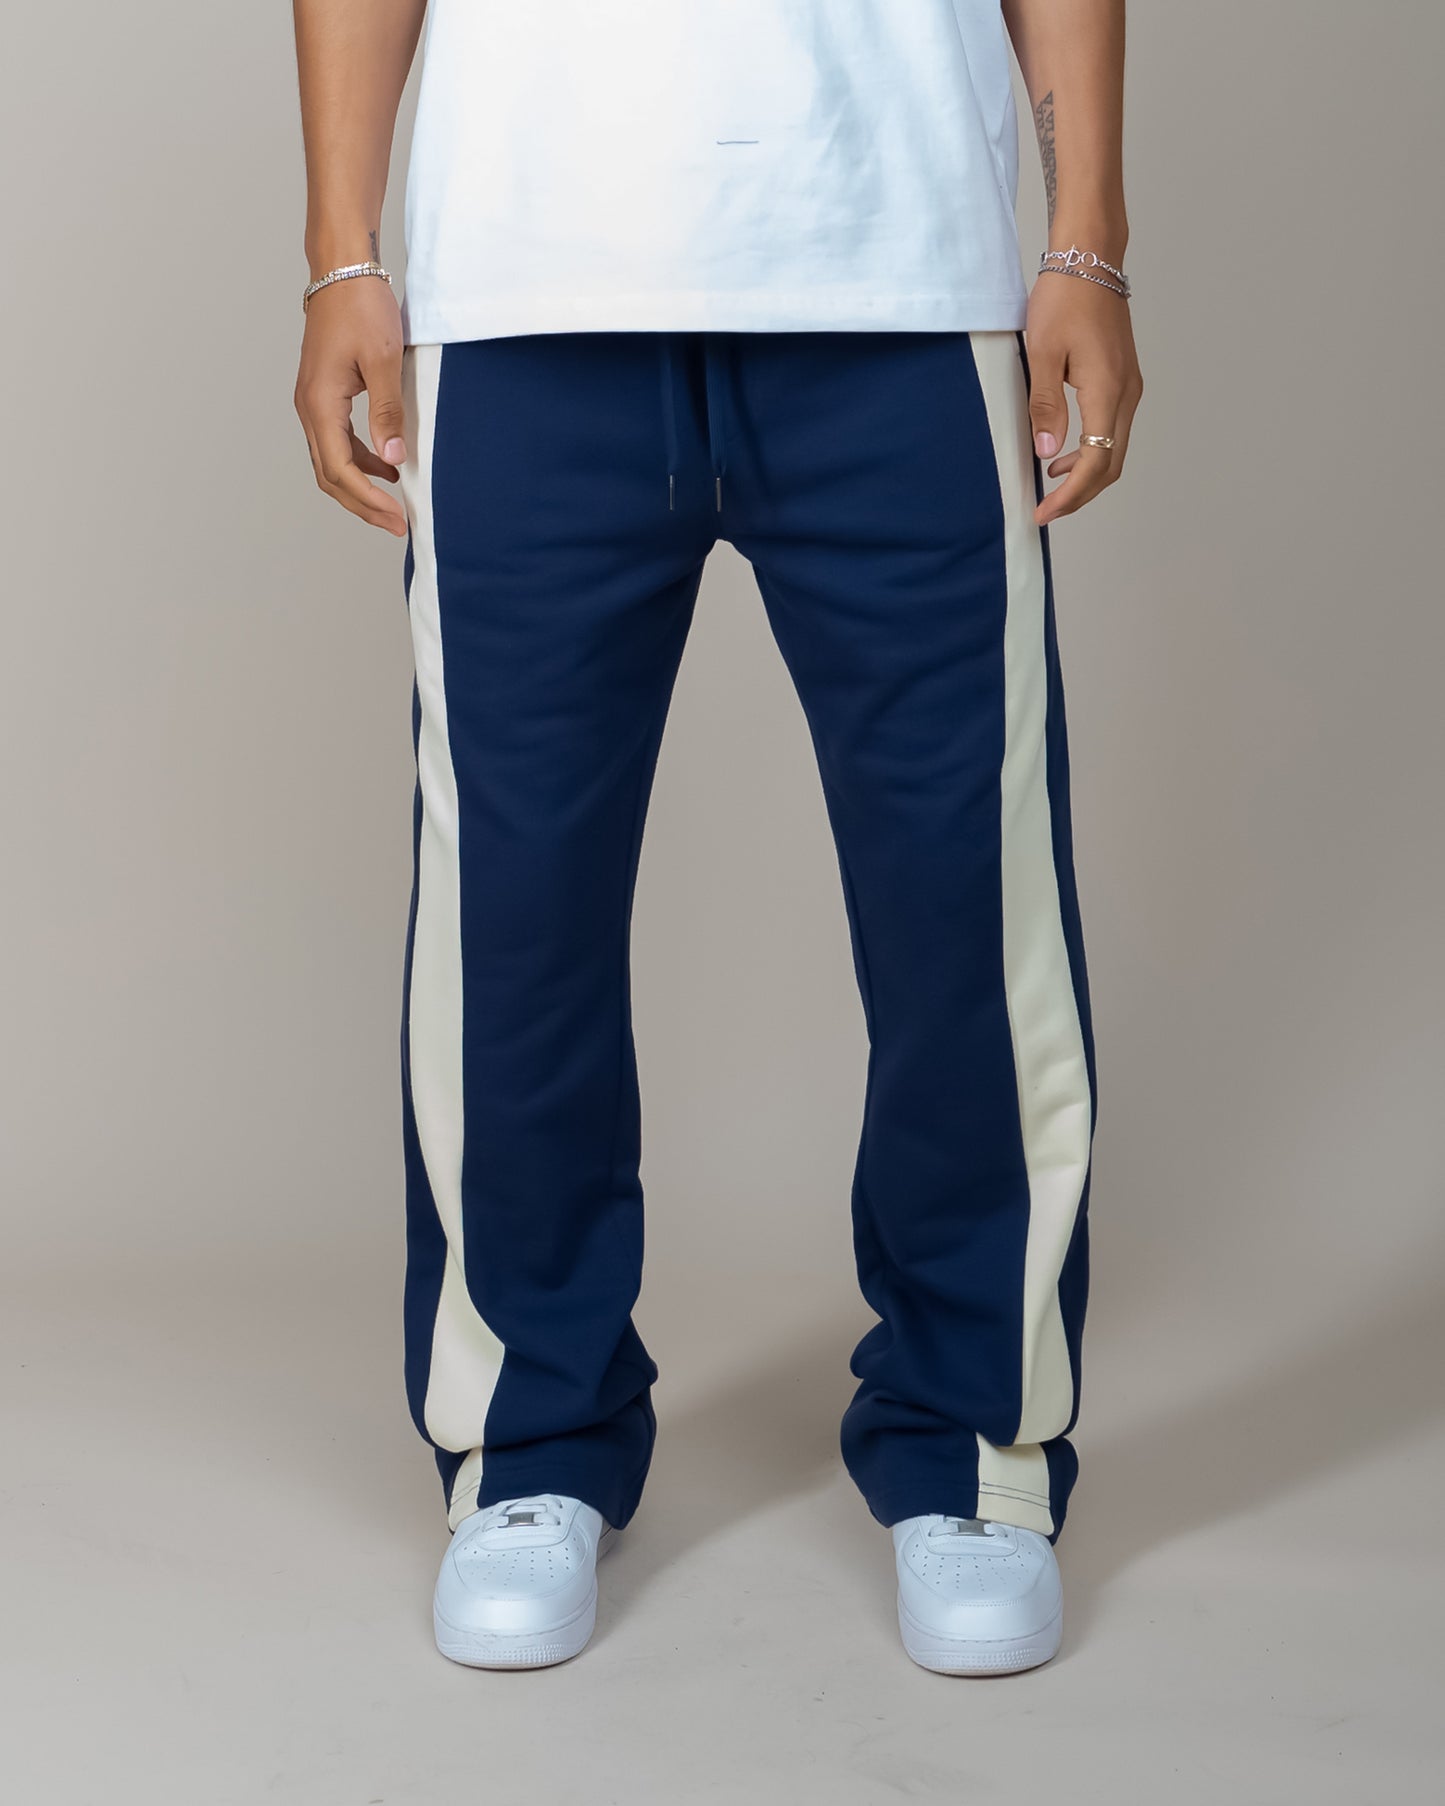 EPTM BARRY FLARE PANTS - NAVY